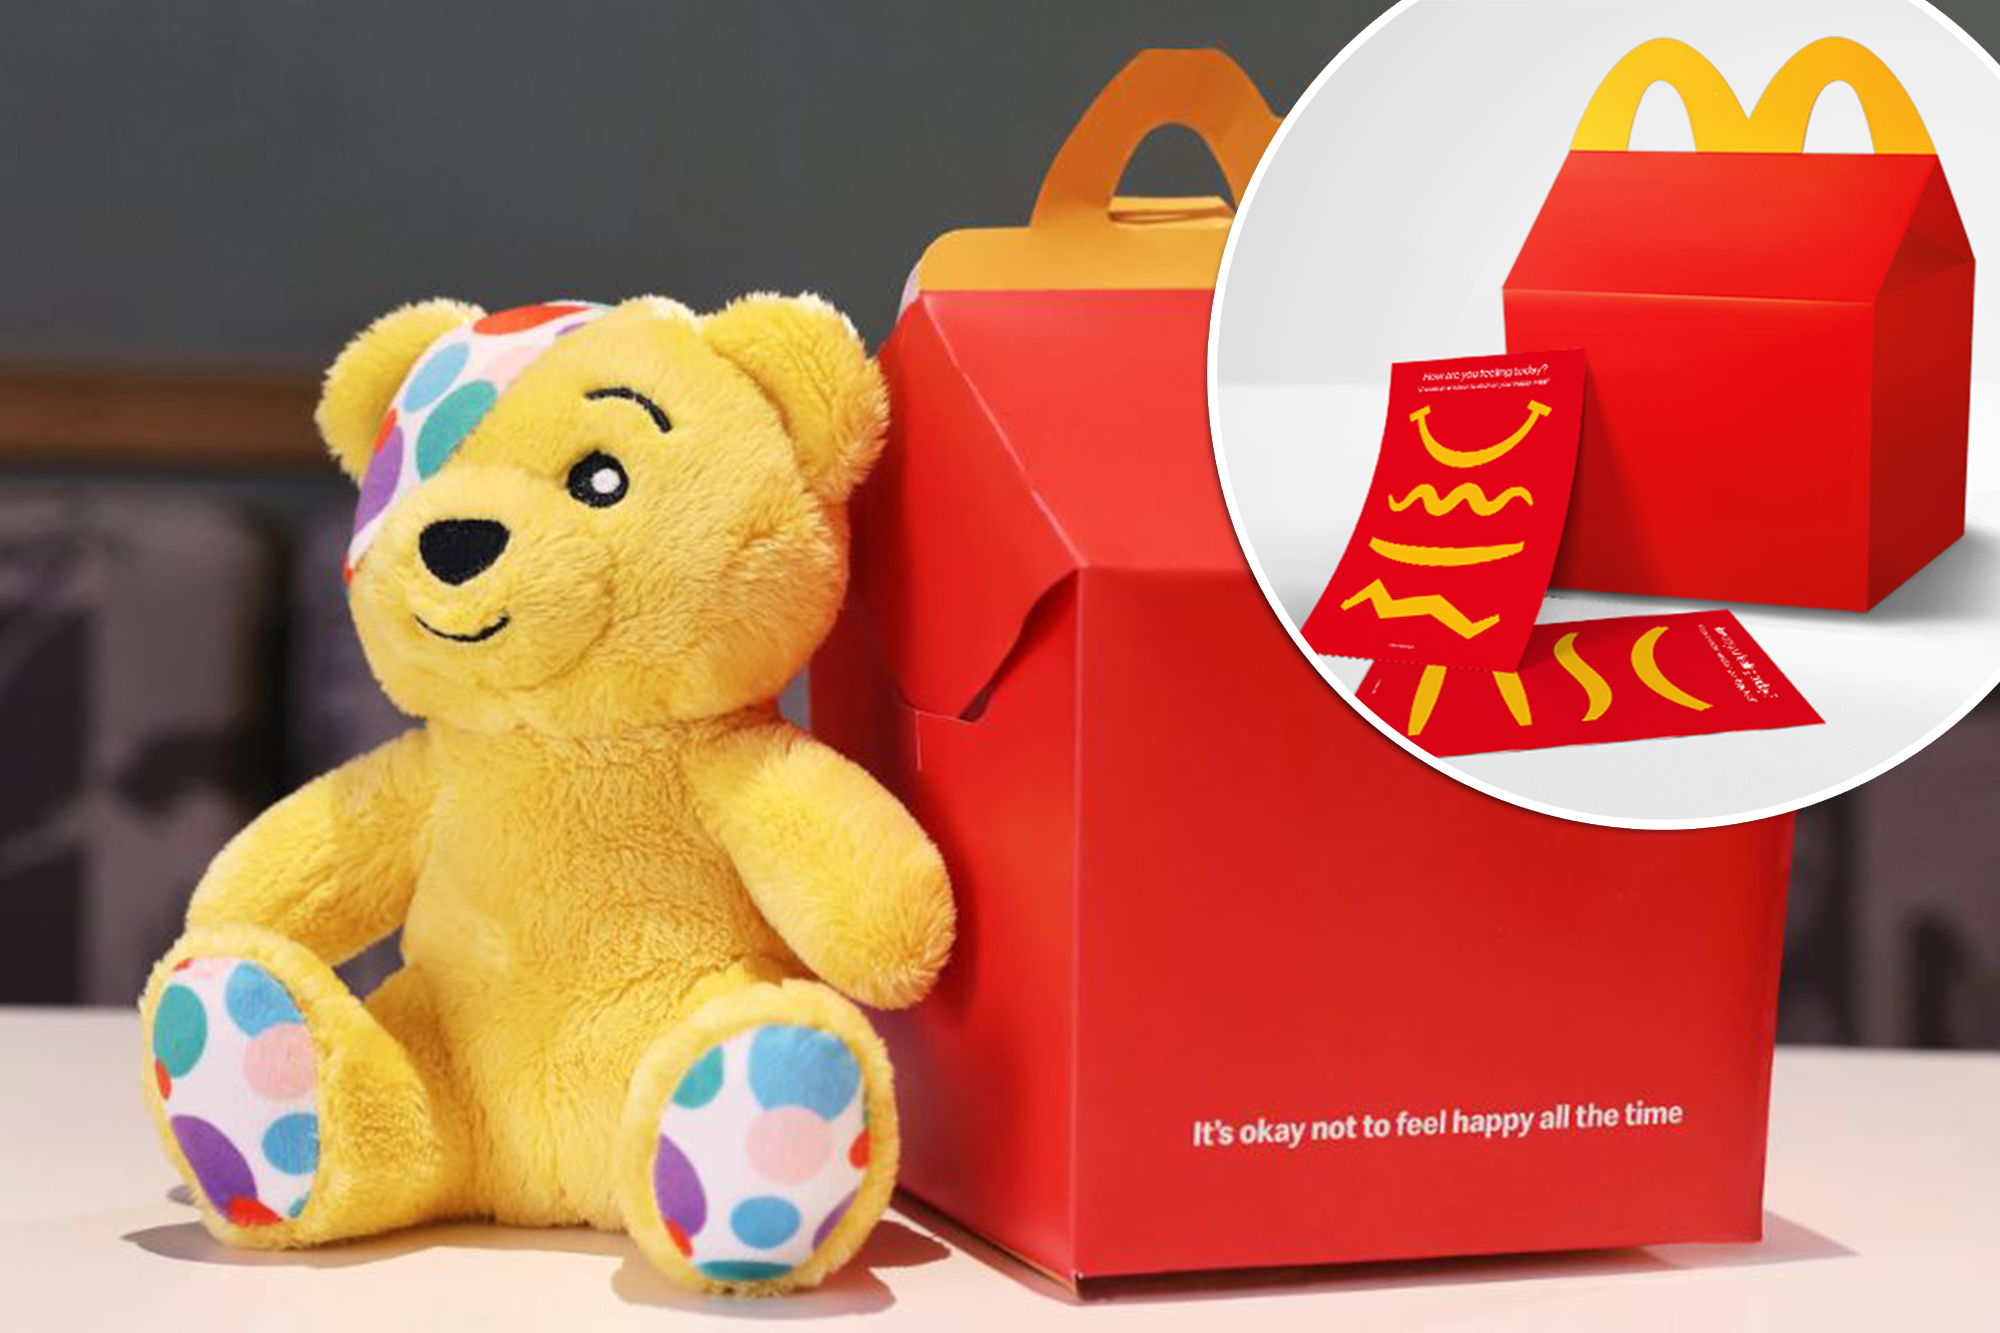 McDonald's adds sad option to replace Happy Meal smile